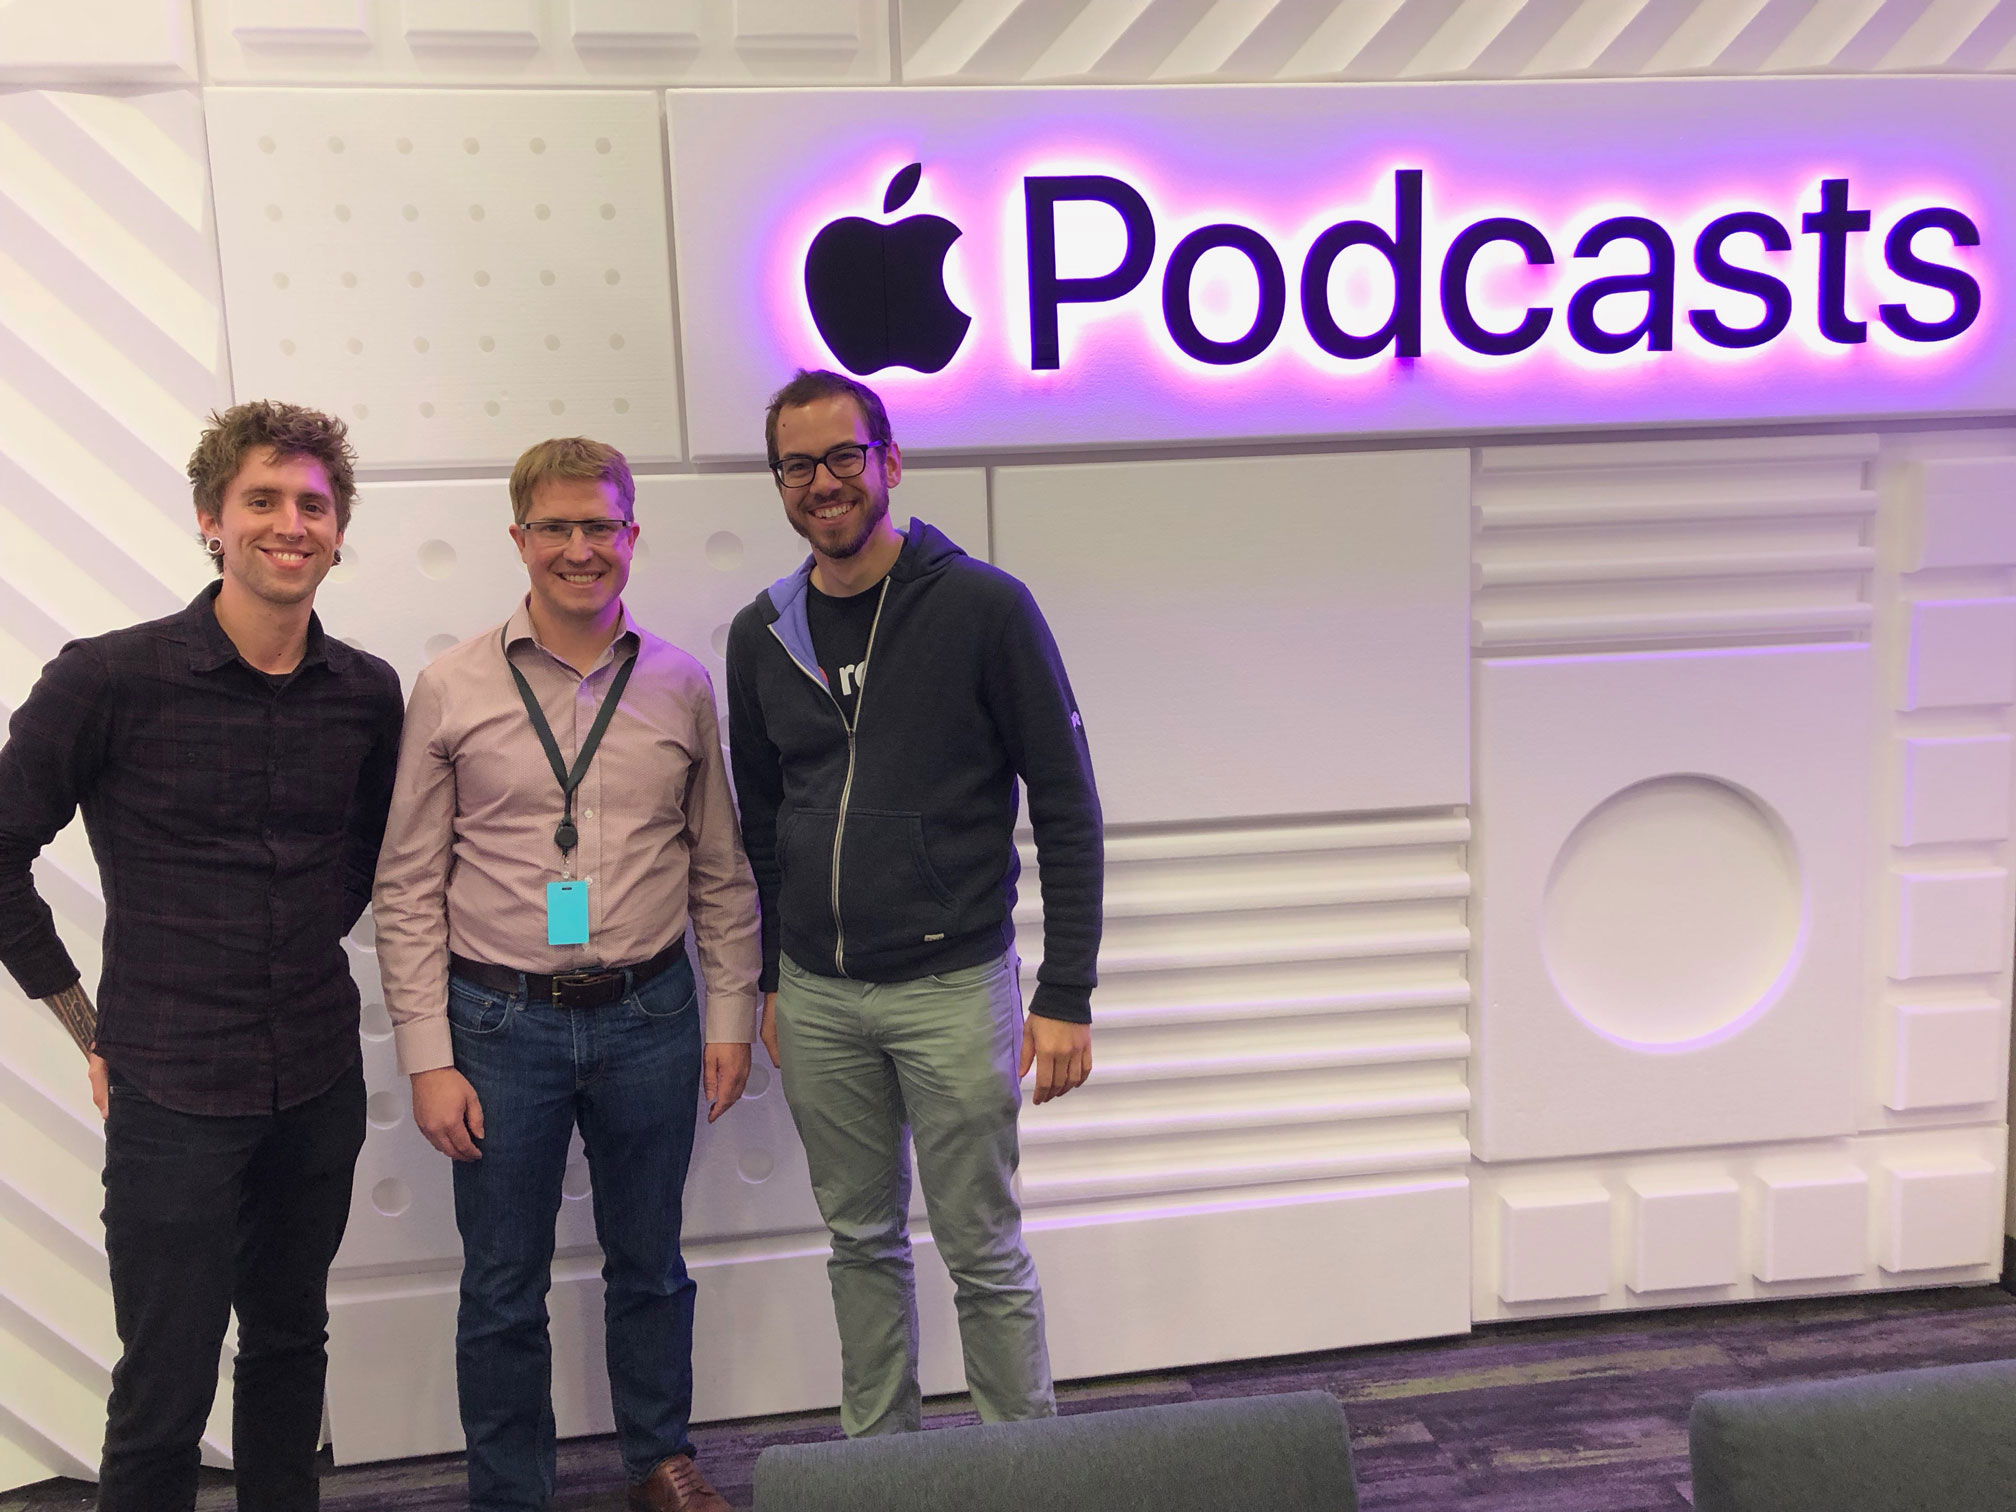 Swift Unwrapped at WWDC 2018